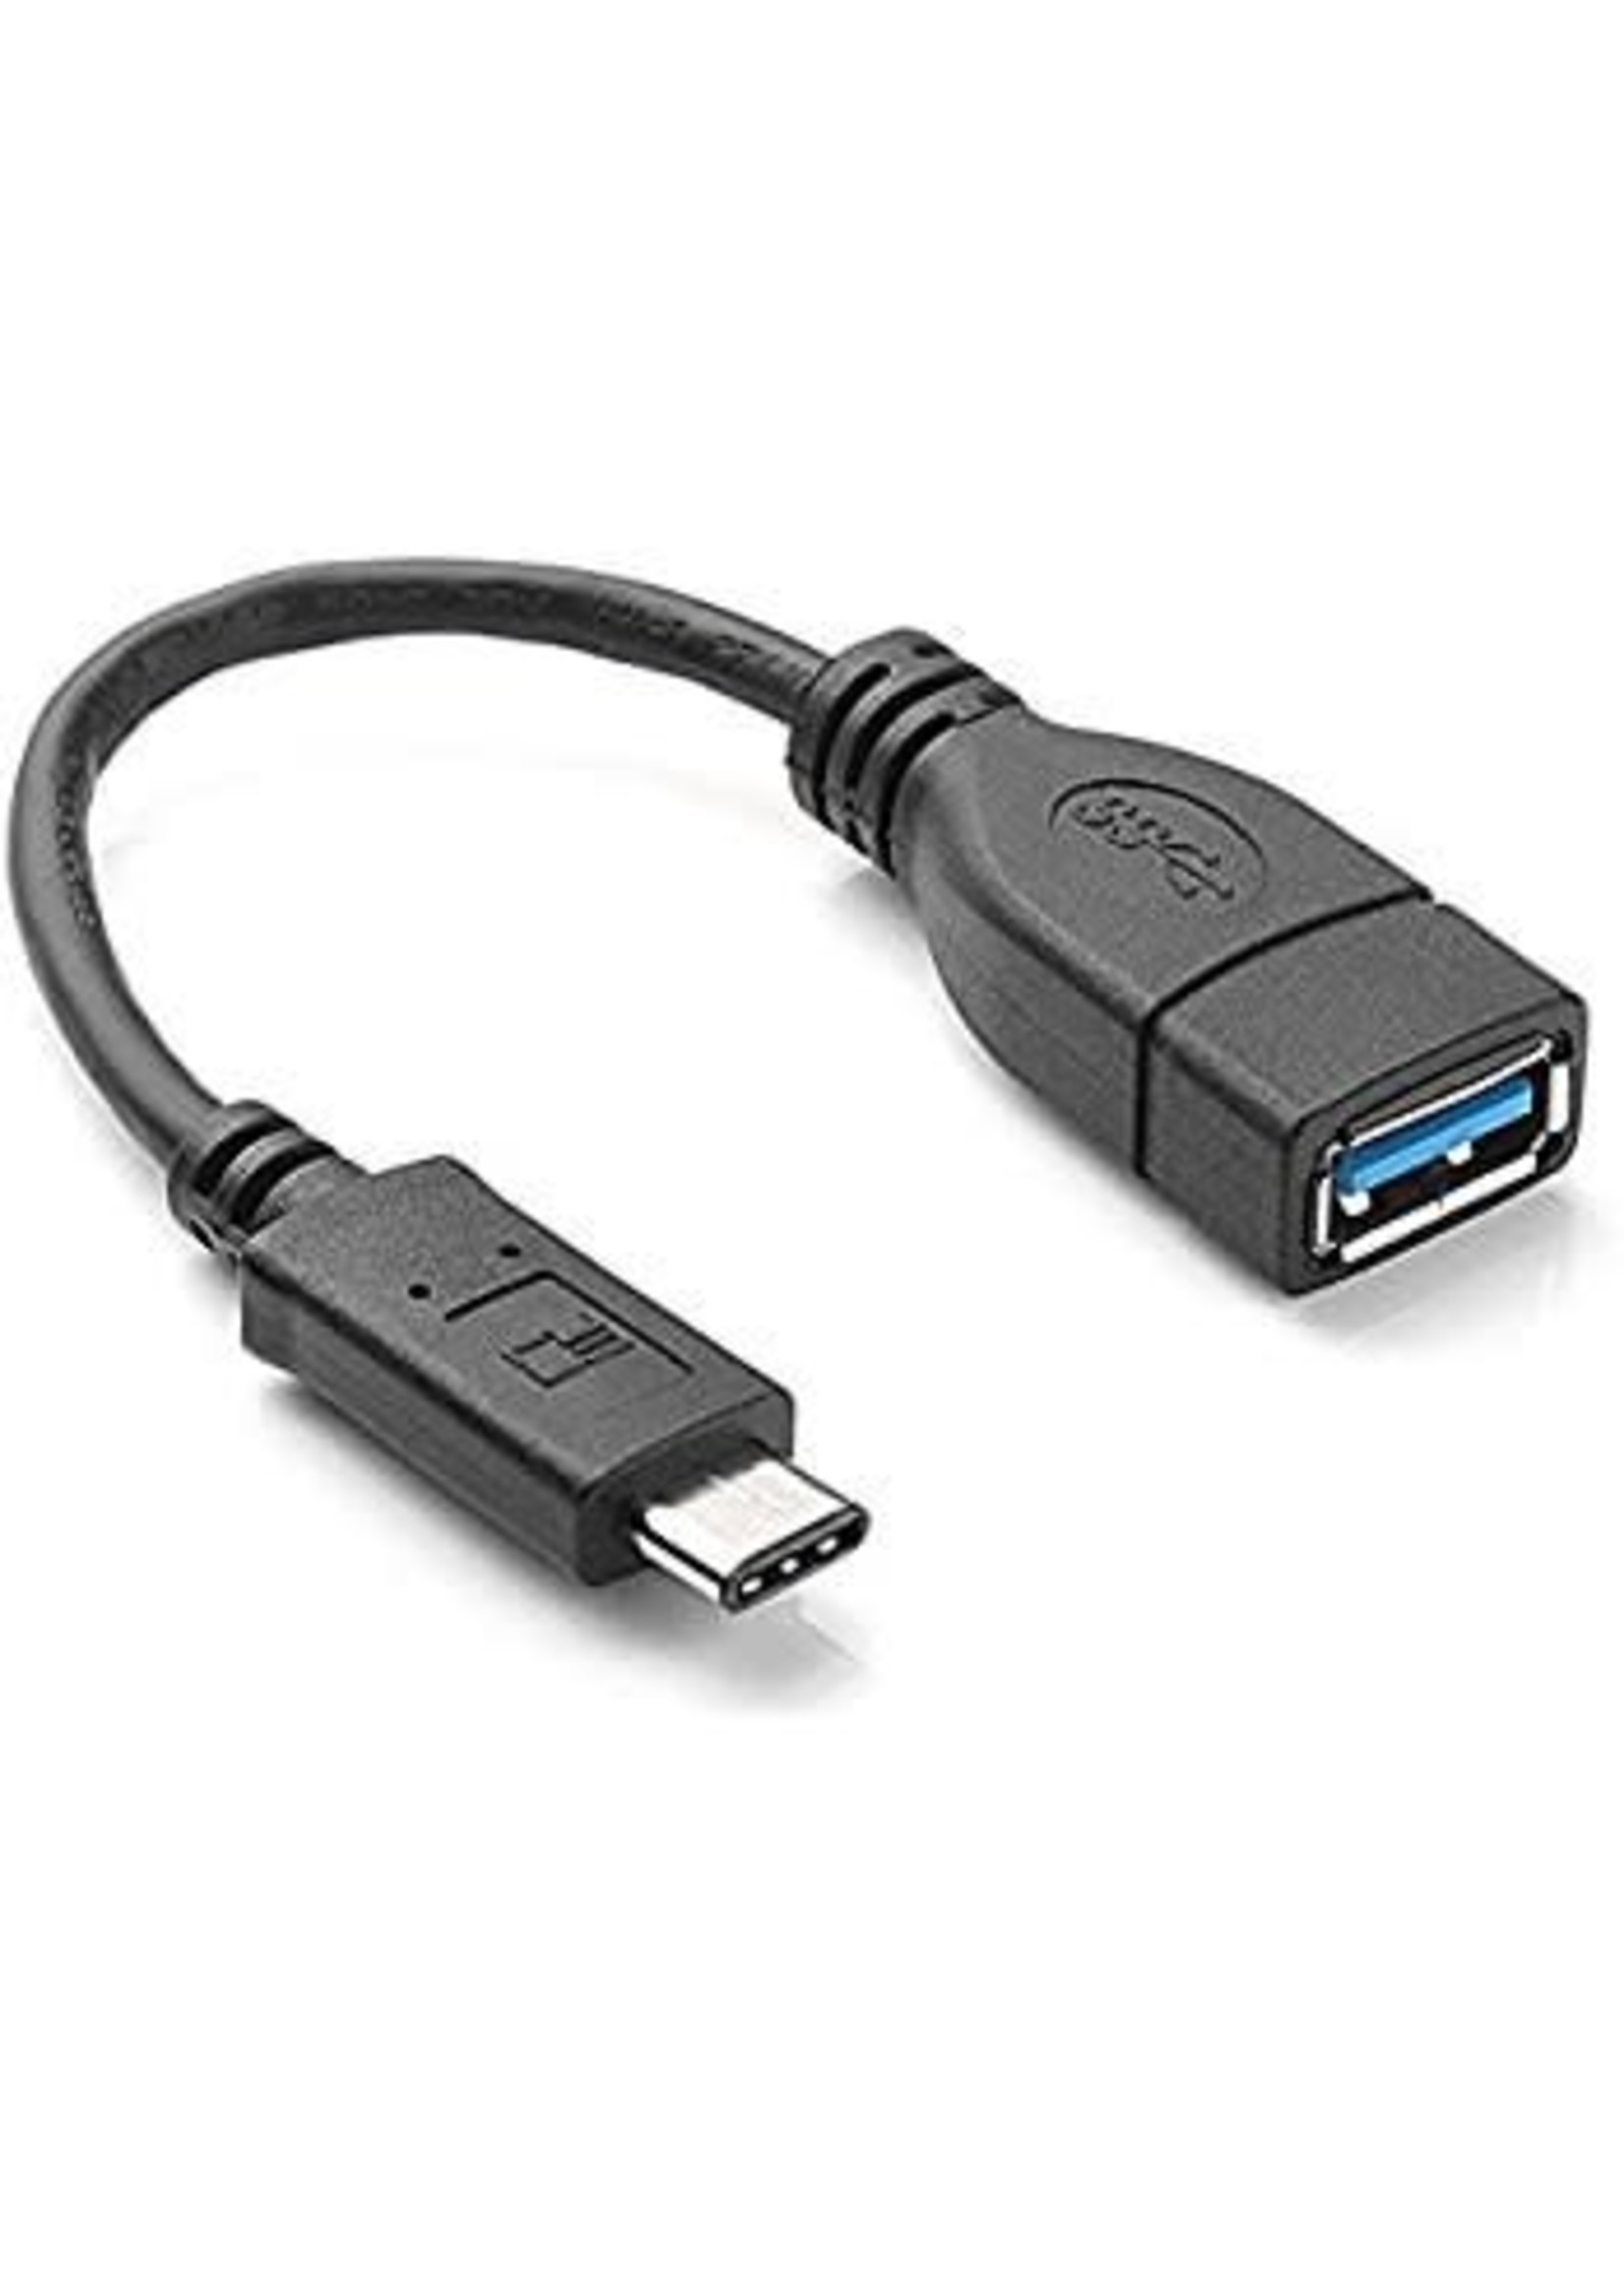 OTG Cable - Type C and Micro USB